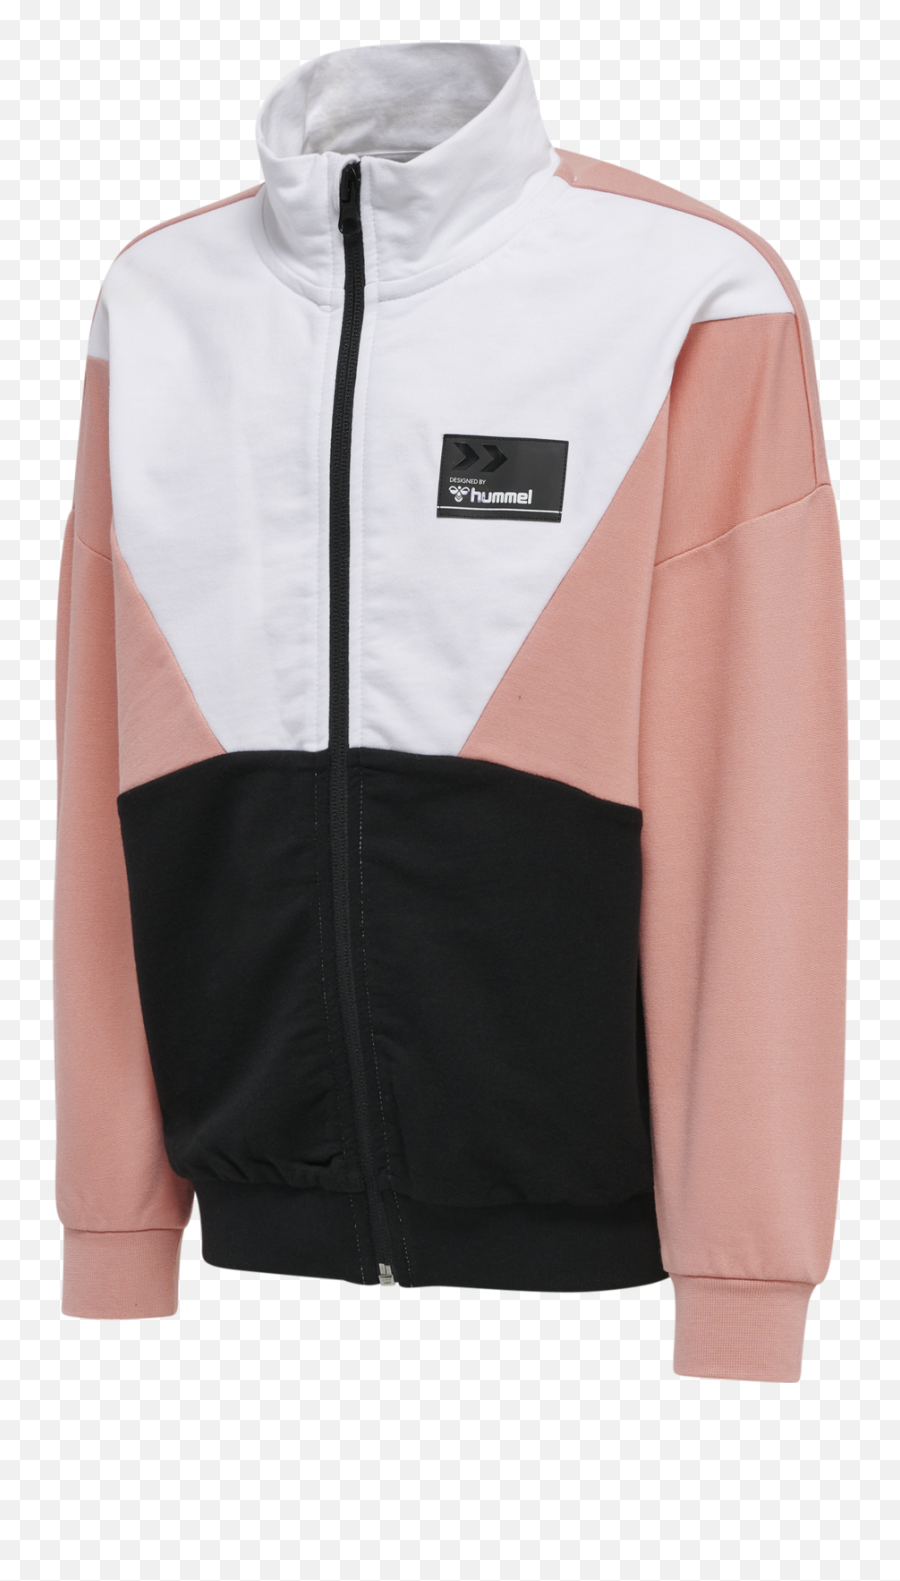 All Amazing Products - Hummel Mia Zip Jacket Png,Pink And Black Icon Jacket